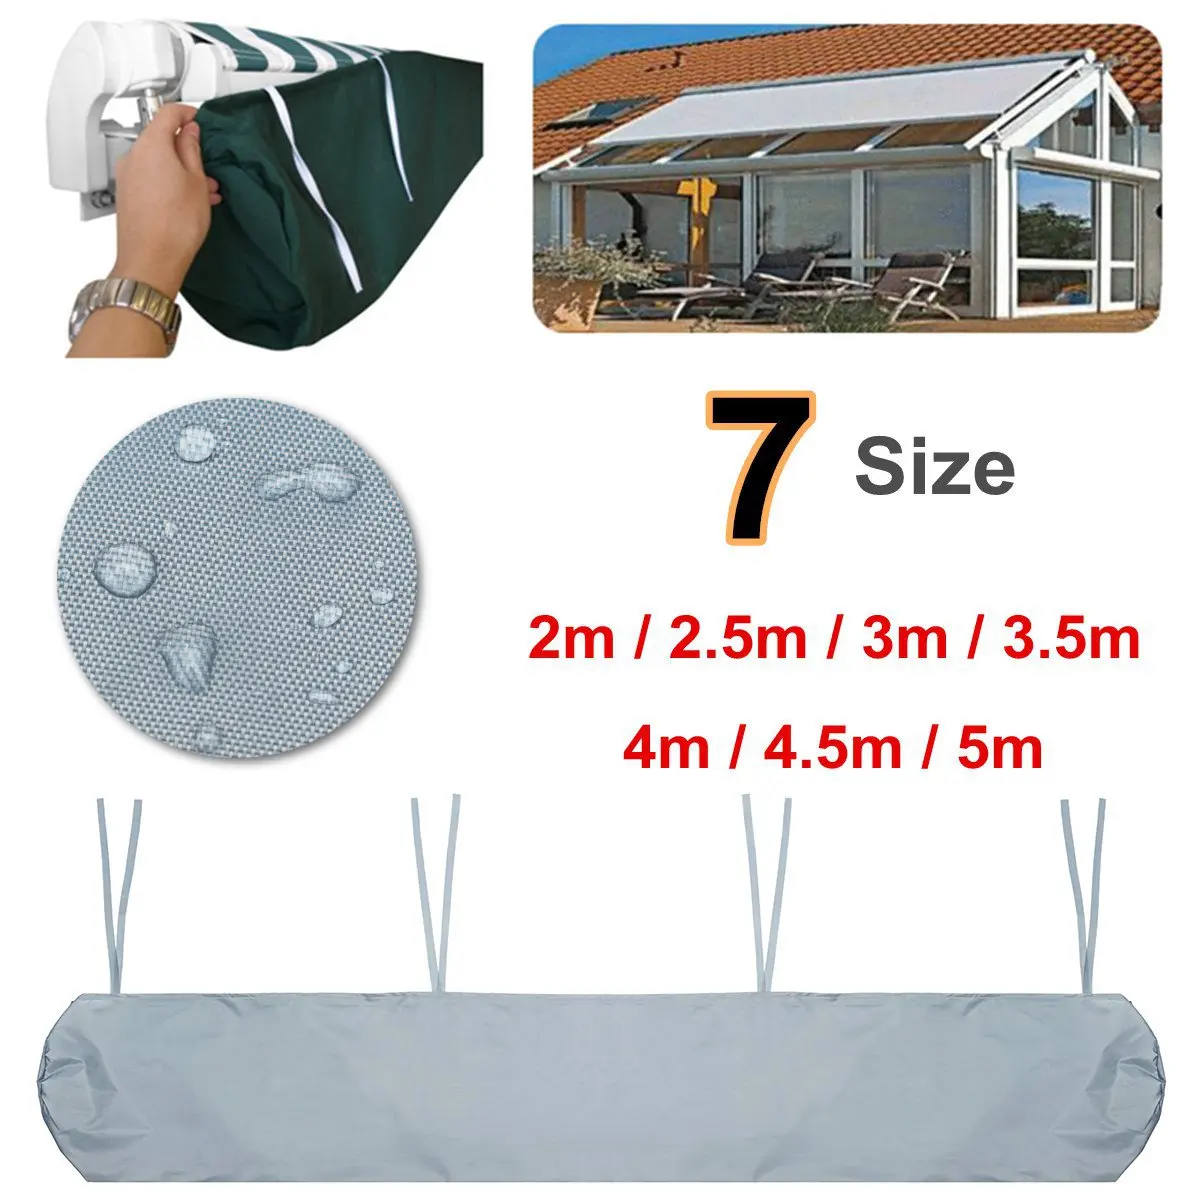 Protective Canopy Shelter Weather Rain Easy Use Awning Storage Cover Outdoor Patio Oxford Cloth Dustproof Winter Water Repellent